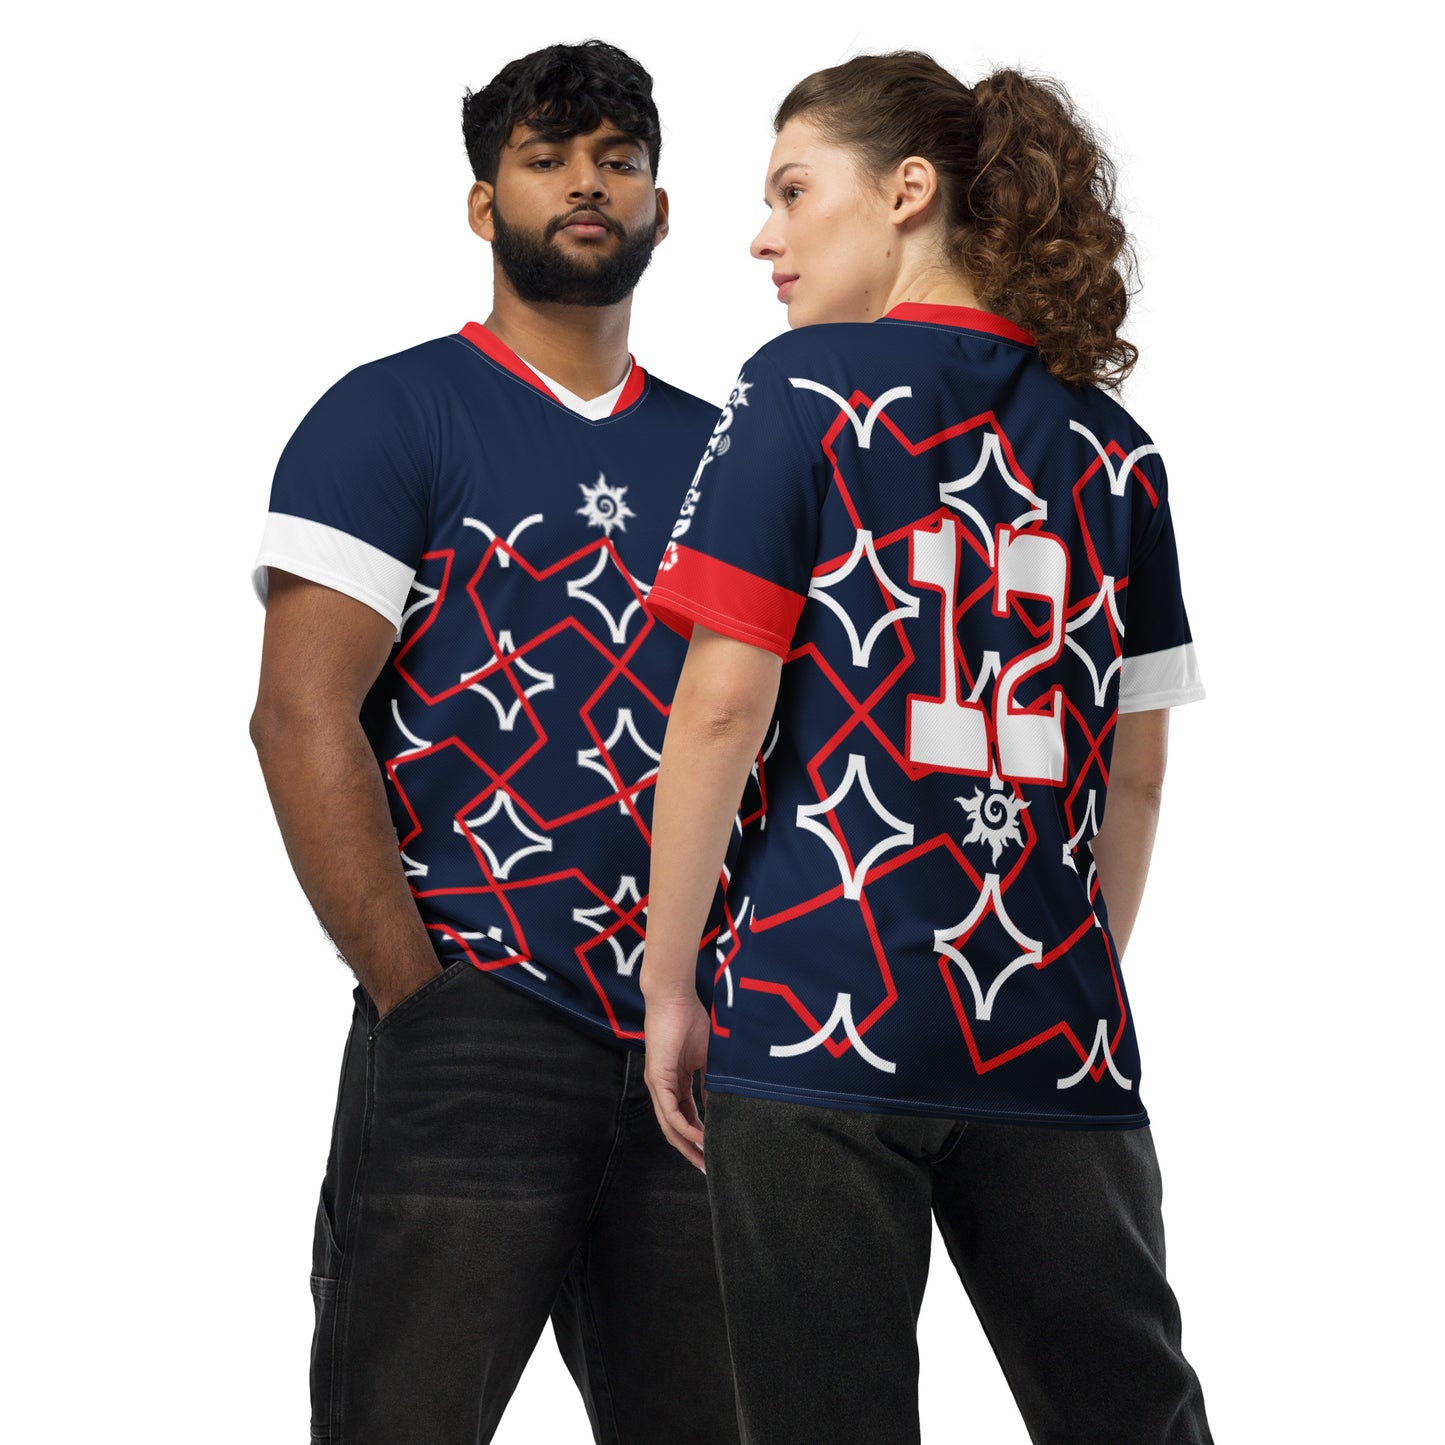 Recycled Unisex Sports Jersey ActSun 5